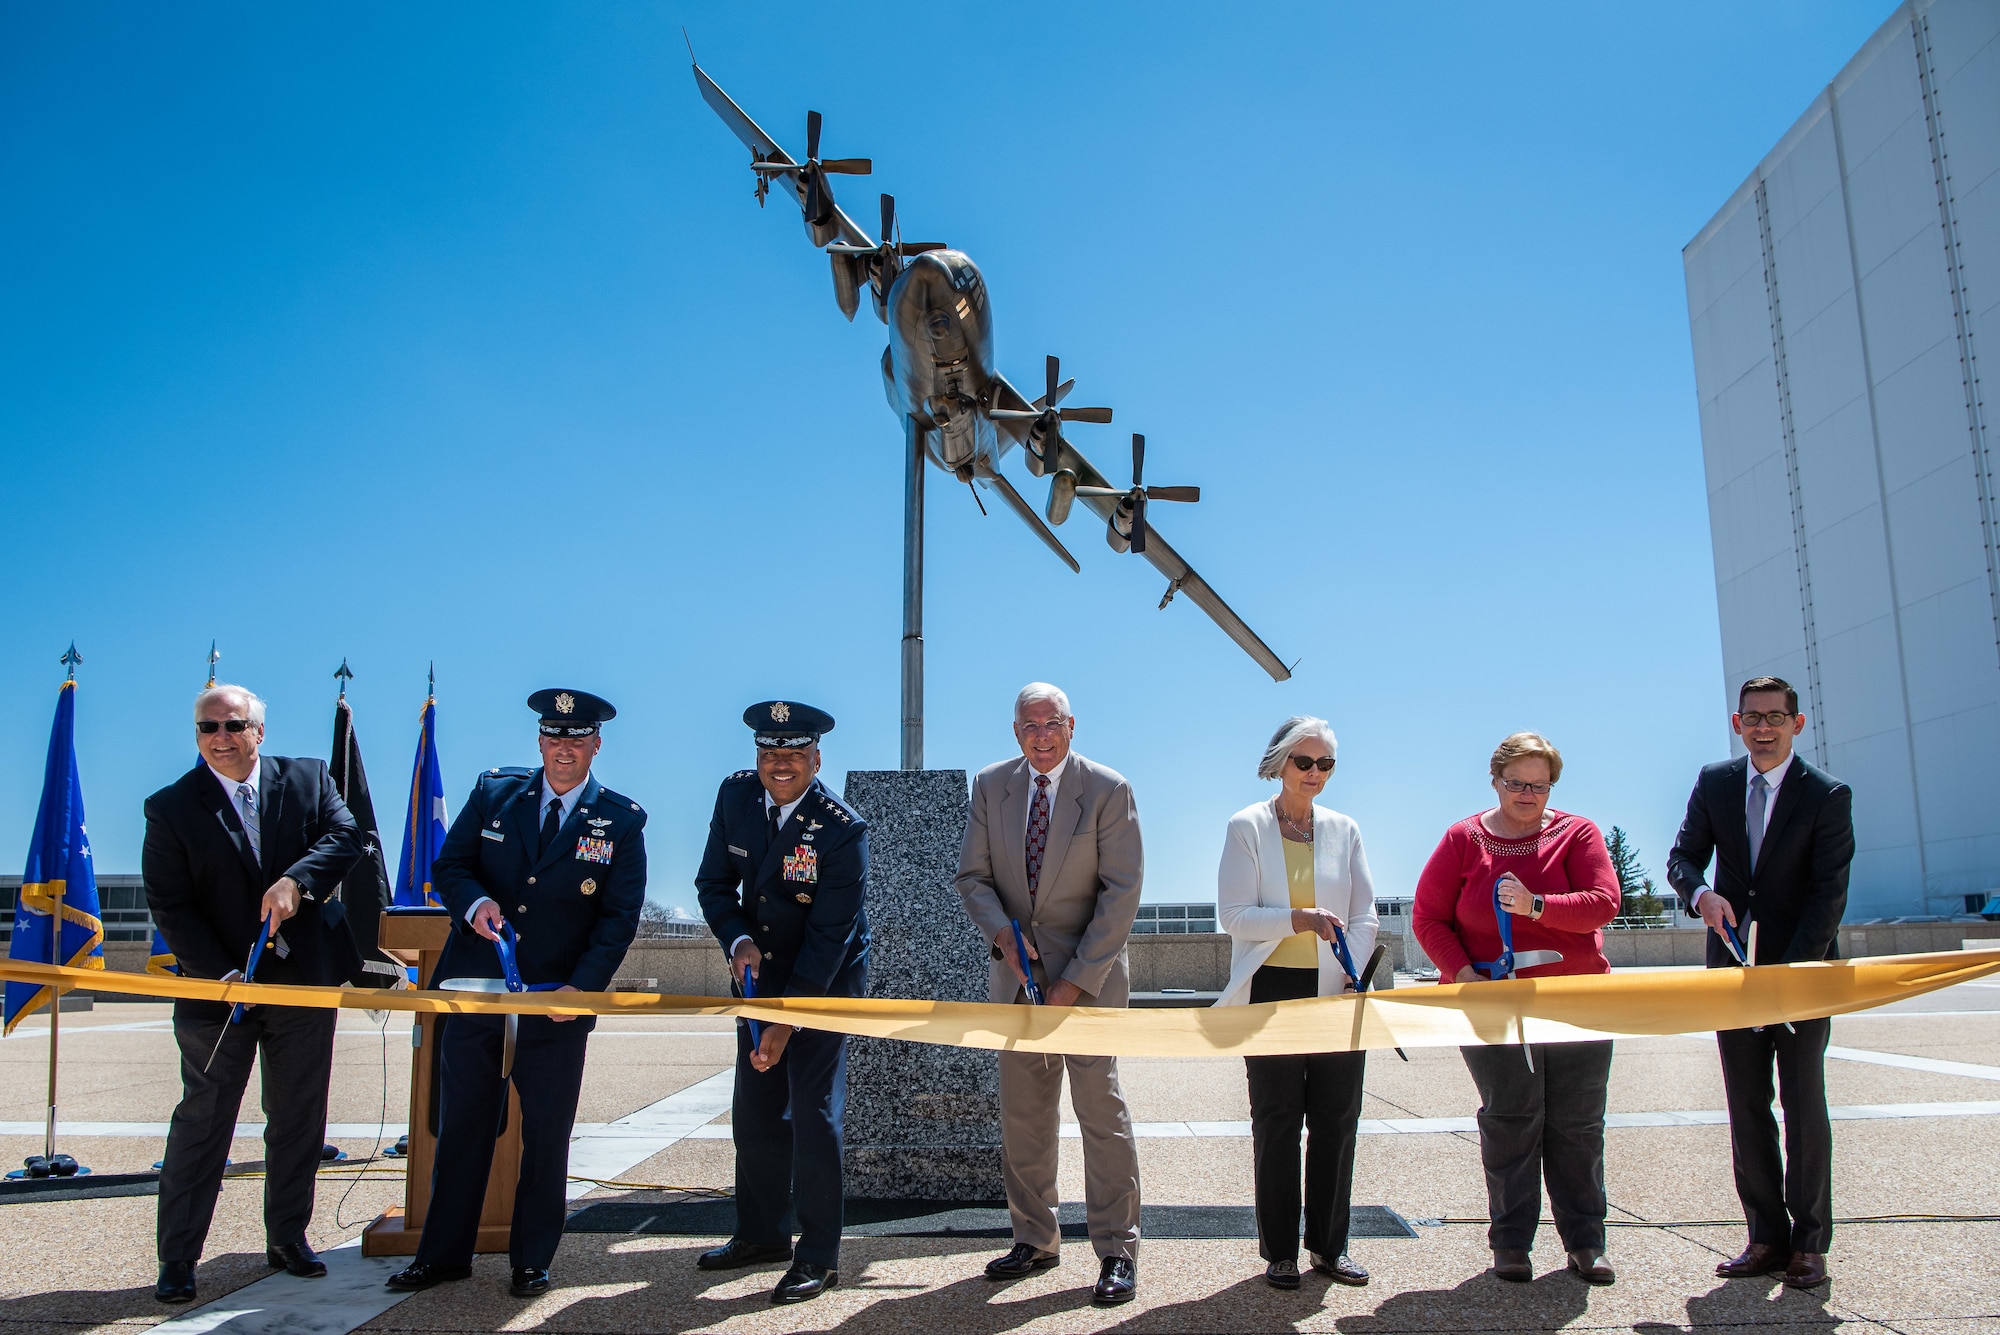 A group of representatives from the U.S. Air Force Academy, City of Colorado Springs, Academy Foundation and Associate of Graduates and Major Paul Weaver's family cut a ribbon to dedicate an AC-130H Sprectre gunship sculpture during a ceremony at the Air Force Academy Colorado on May 5, 2023.